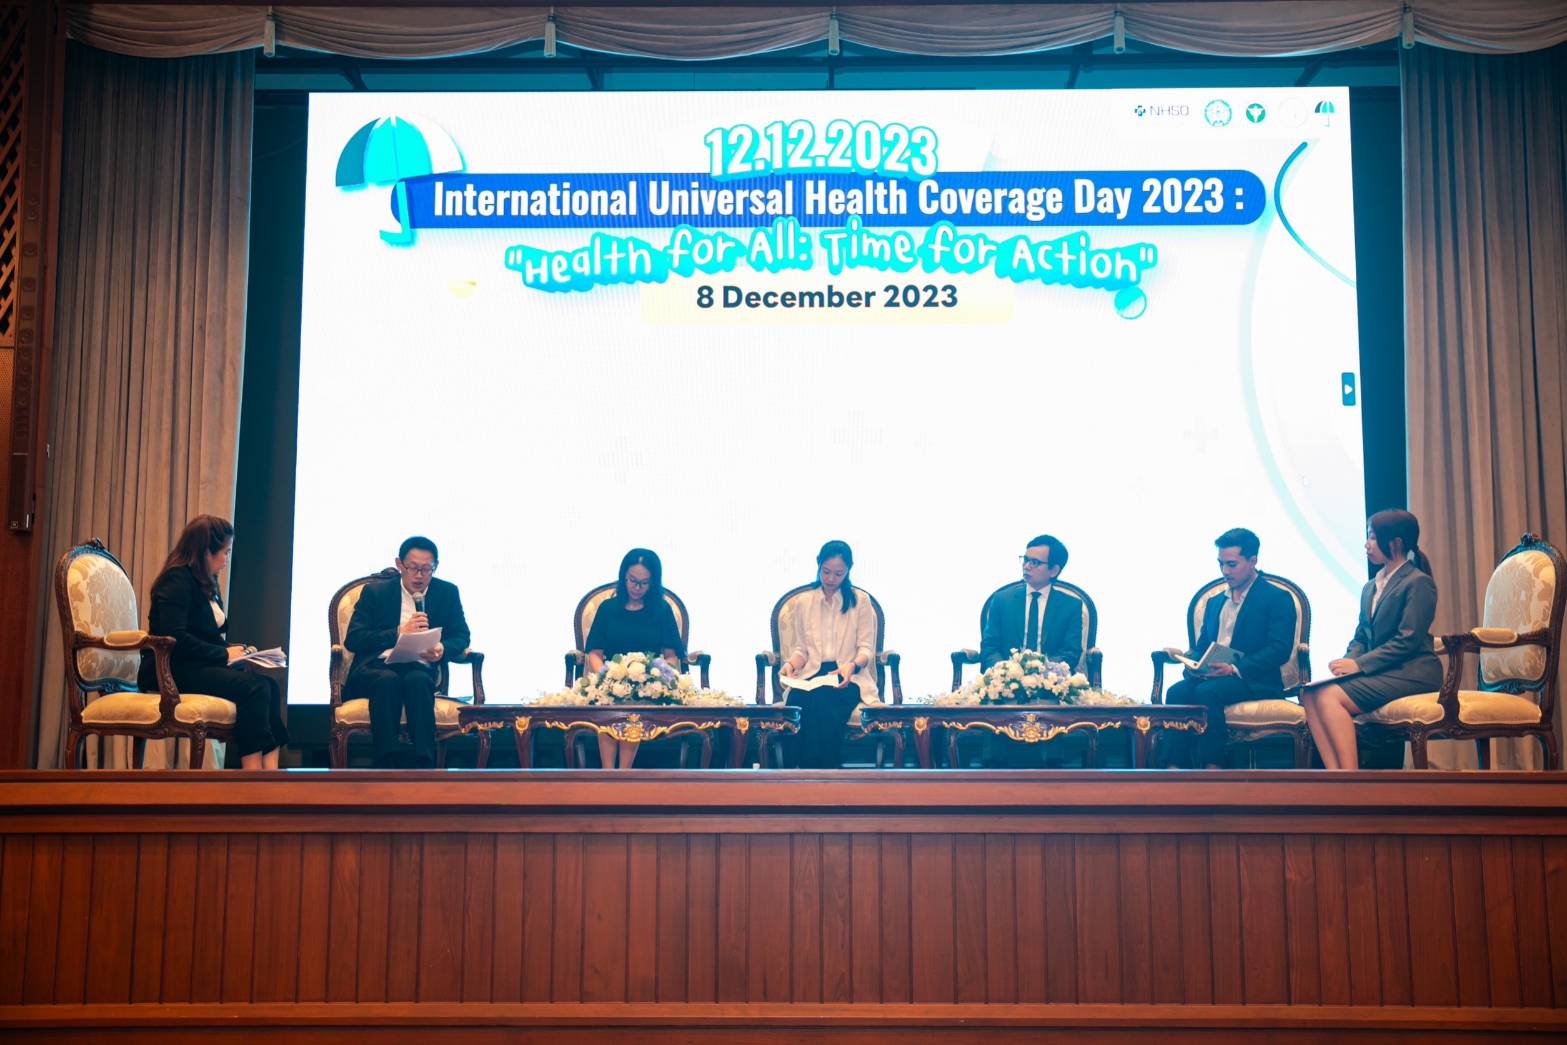 Global threats loom over Universal Health Coverage, yet solutions are within reach